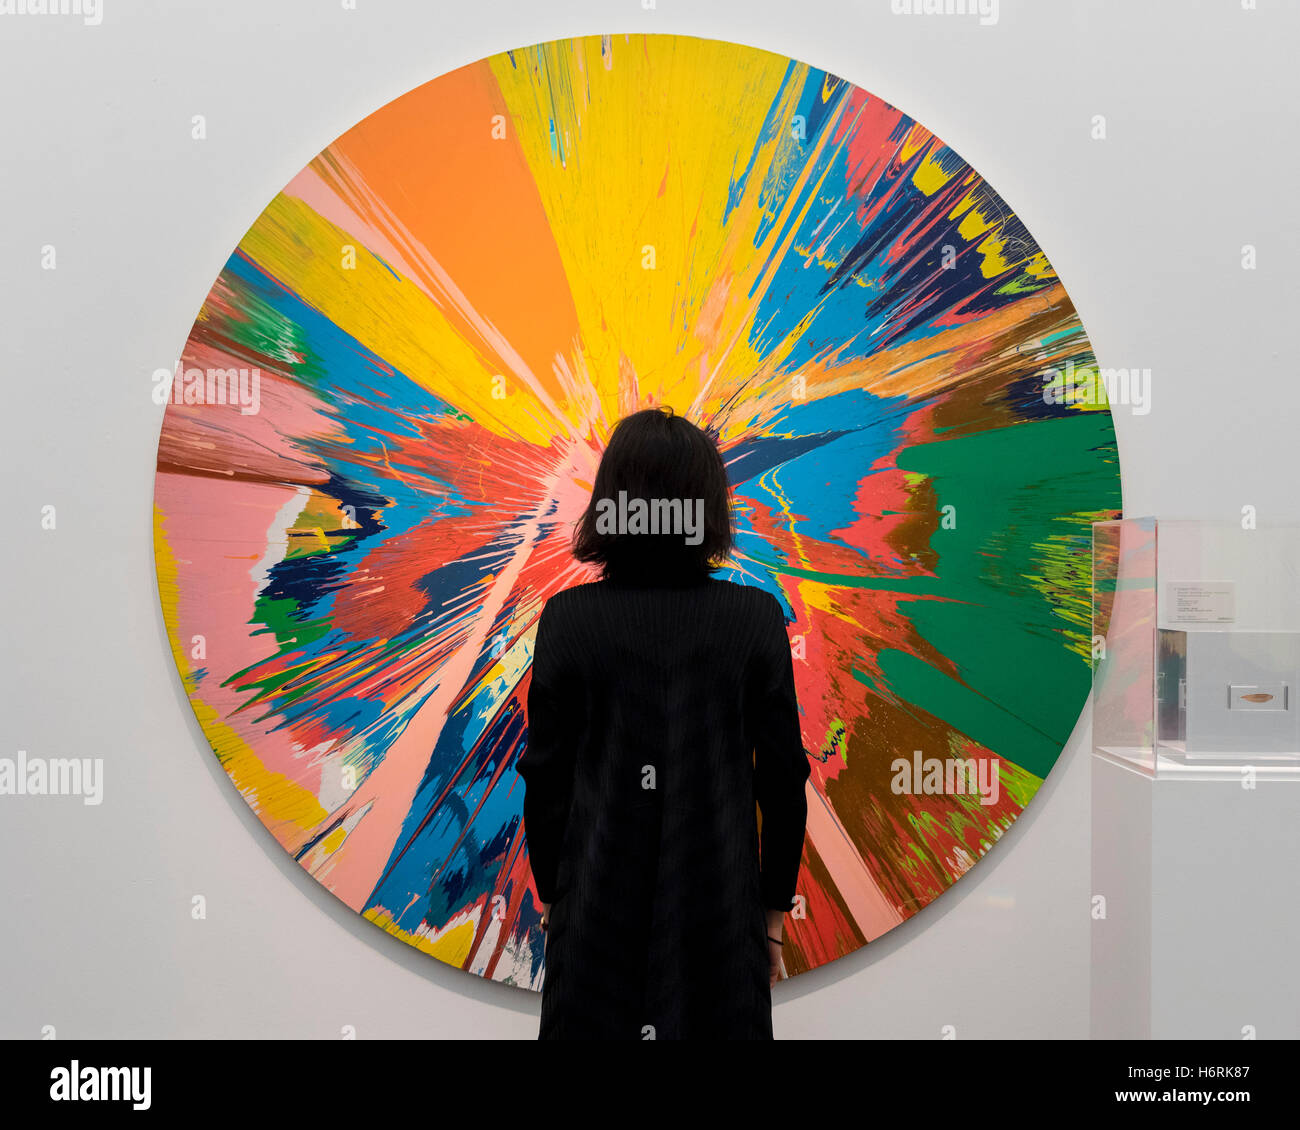 London, UK. 1st Nov, 2016. A staff member views 'Beautiful, shattering, slashing, violent, pinky, hacking, sphincter painting' by Damian Hirst, est. GBP250-350k. The first look of 'Bowie/Collector', artworks from the late David Bowie's personal art collection, ahead of their sale later this month at Sotheby's. Credit:  Stephen Chung/Alamy Live News Stock Photo